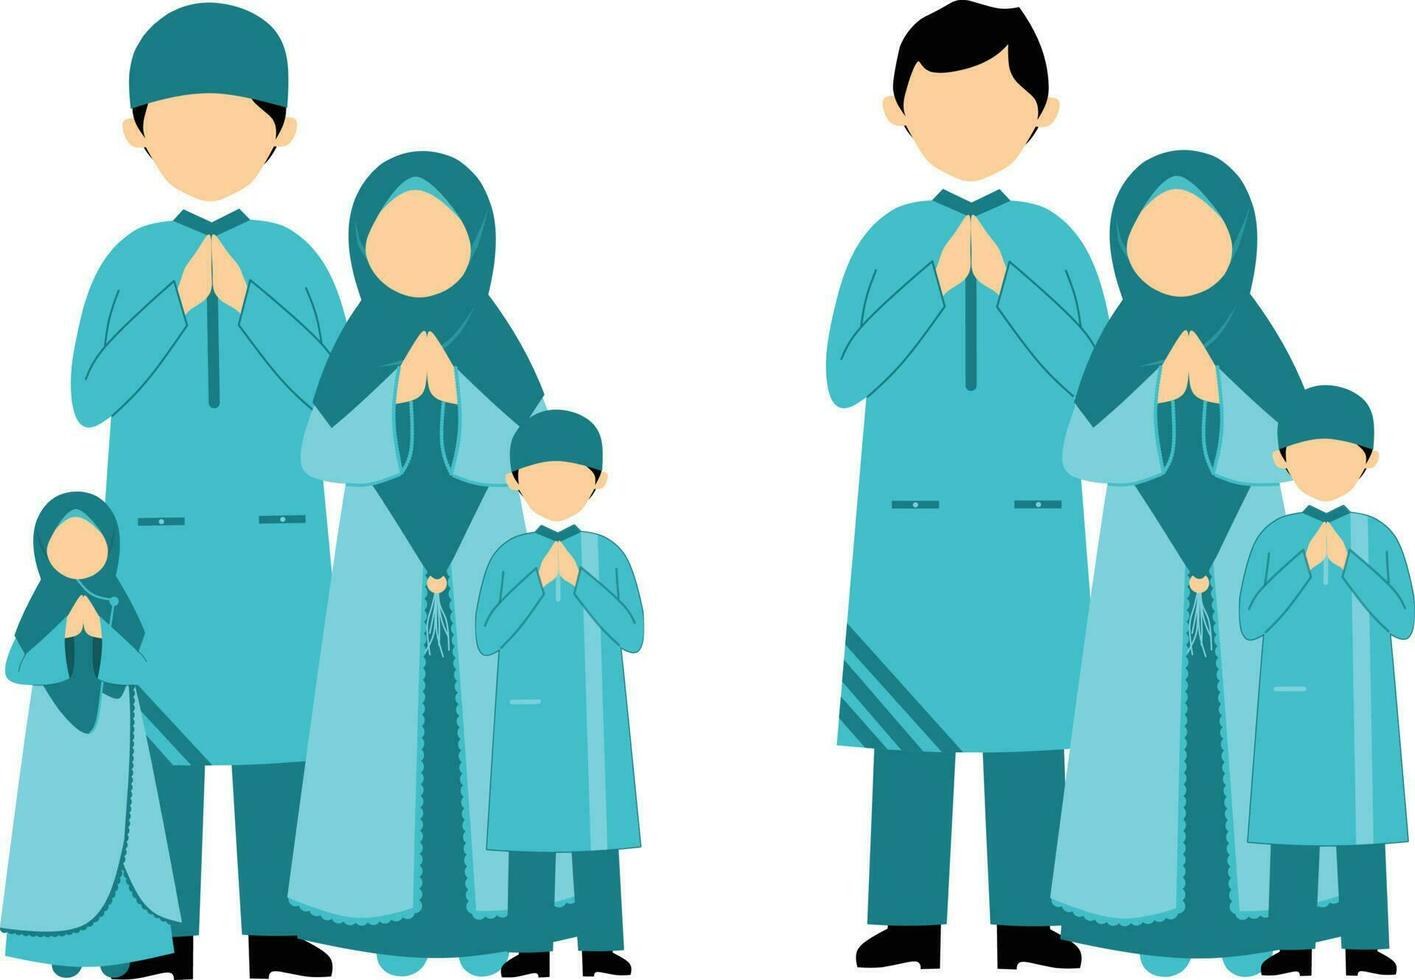 Muslim family in traditional clothes. Muslim men and women with children. Vector illustration